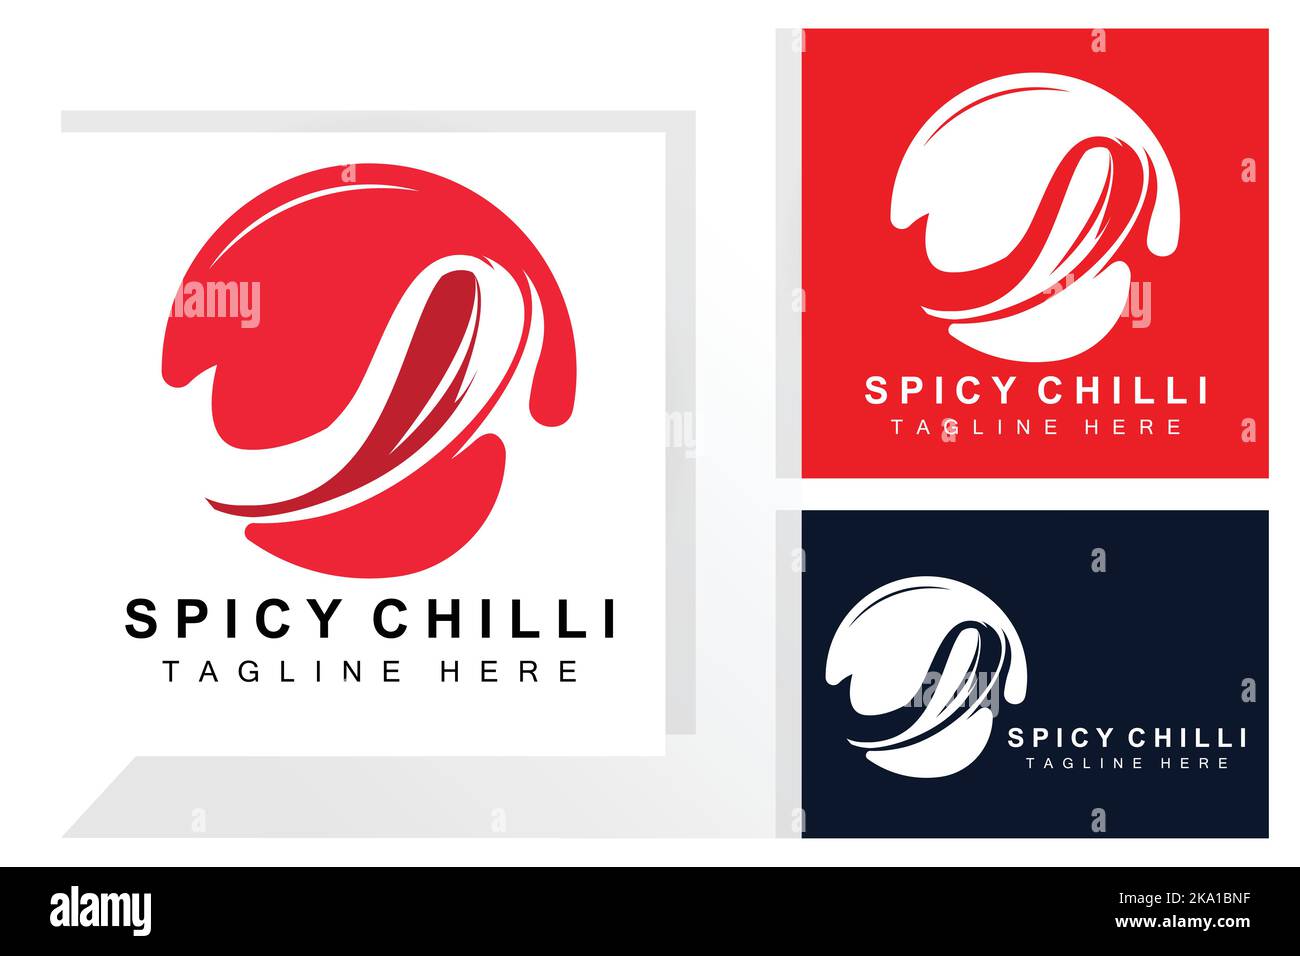 Spicy Chili Logo Design, Red Vegetable Illustration, Kitchen Ingredients, Hot Chili Vector Brand Products Stock Vector